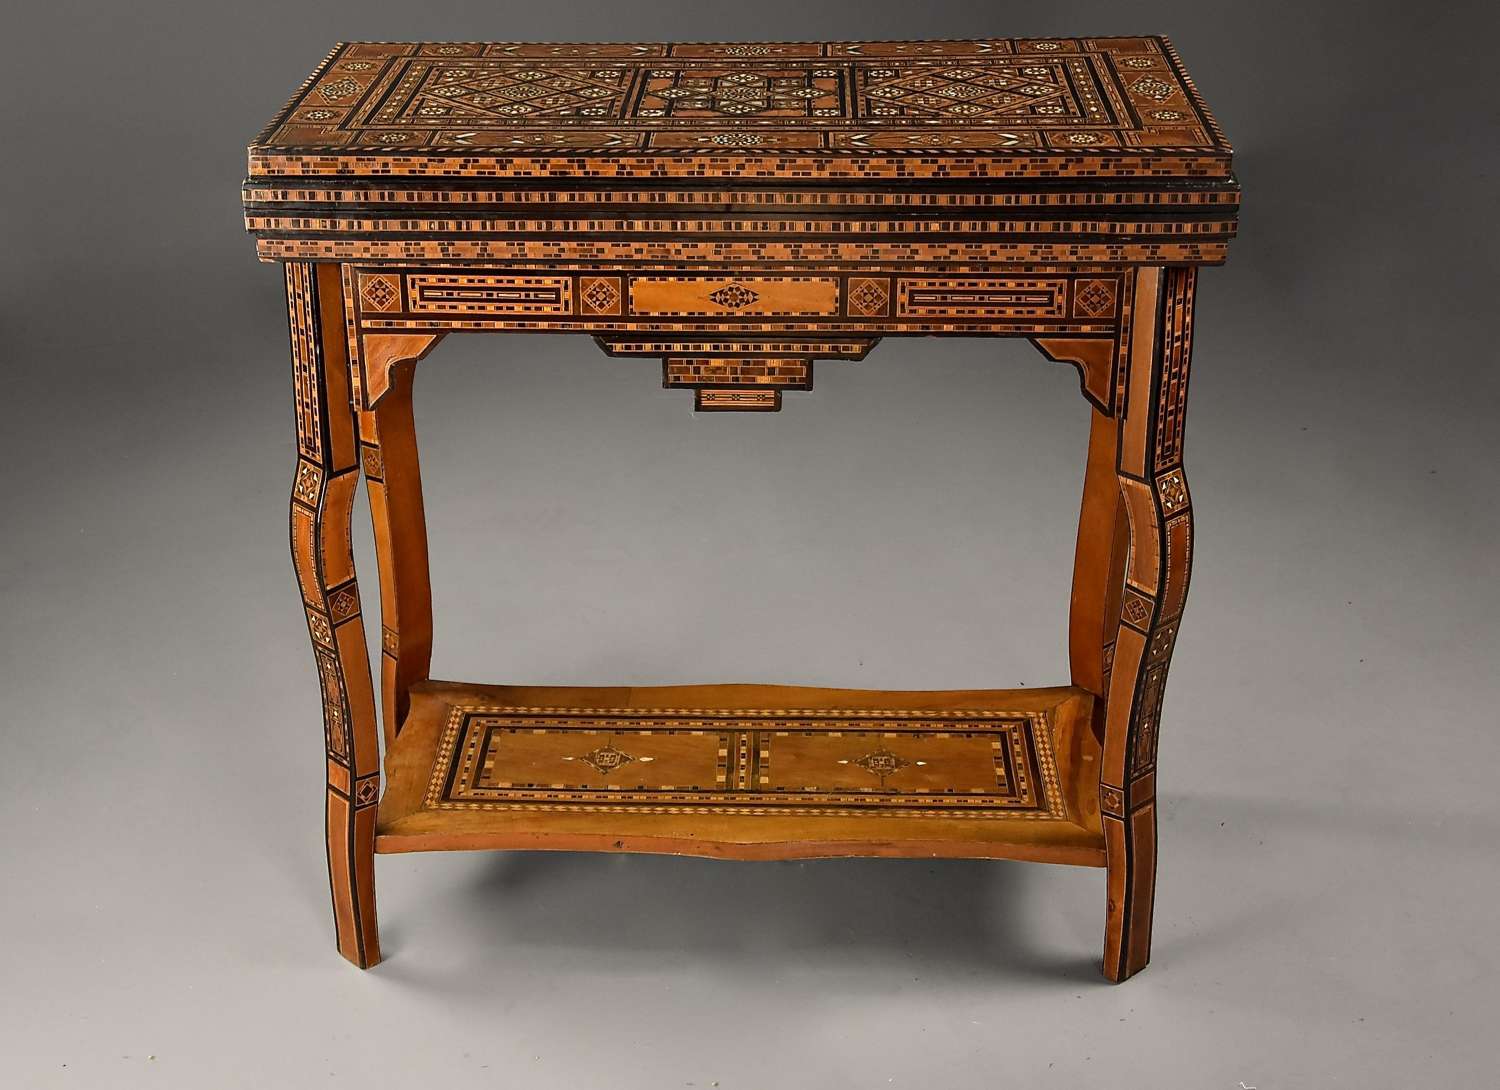 Highly decorative early 20thc Middle Eastern Damascus games table